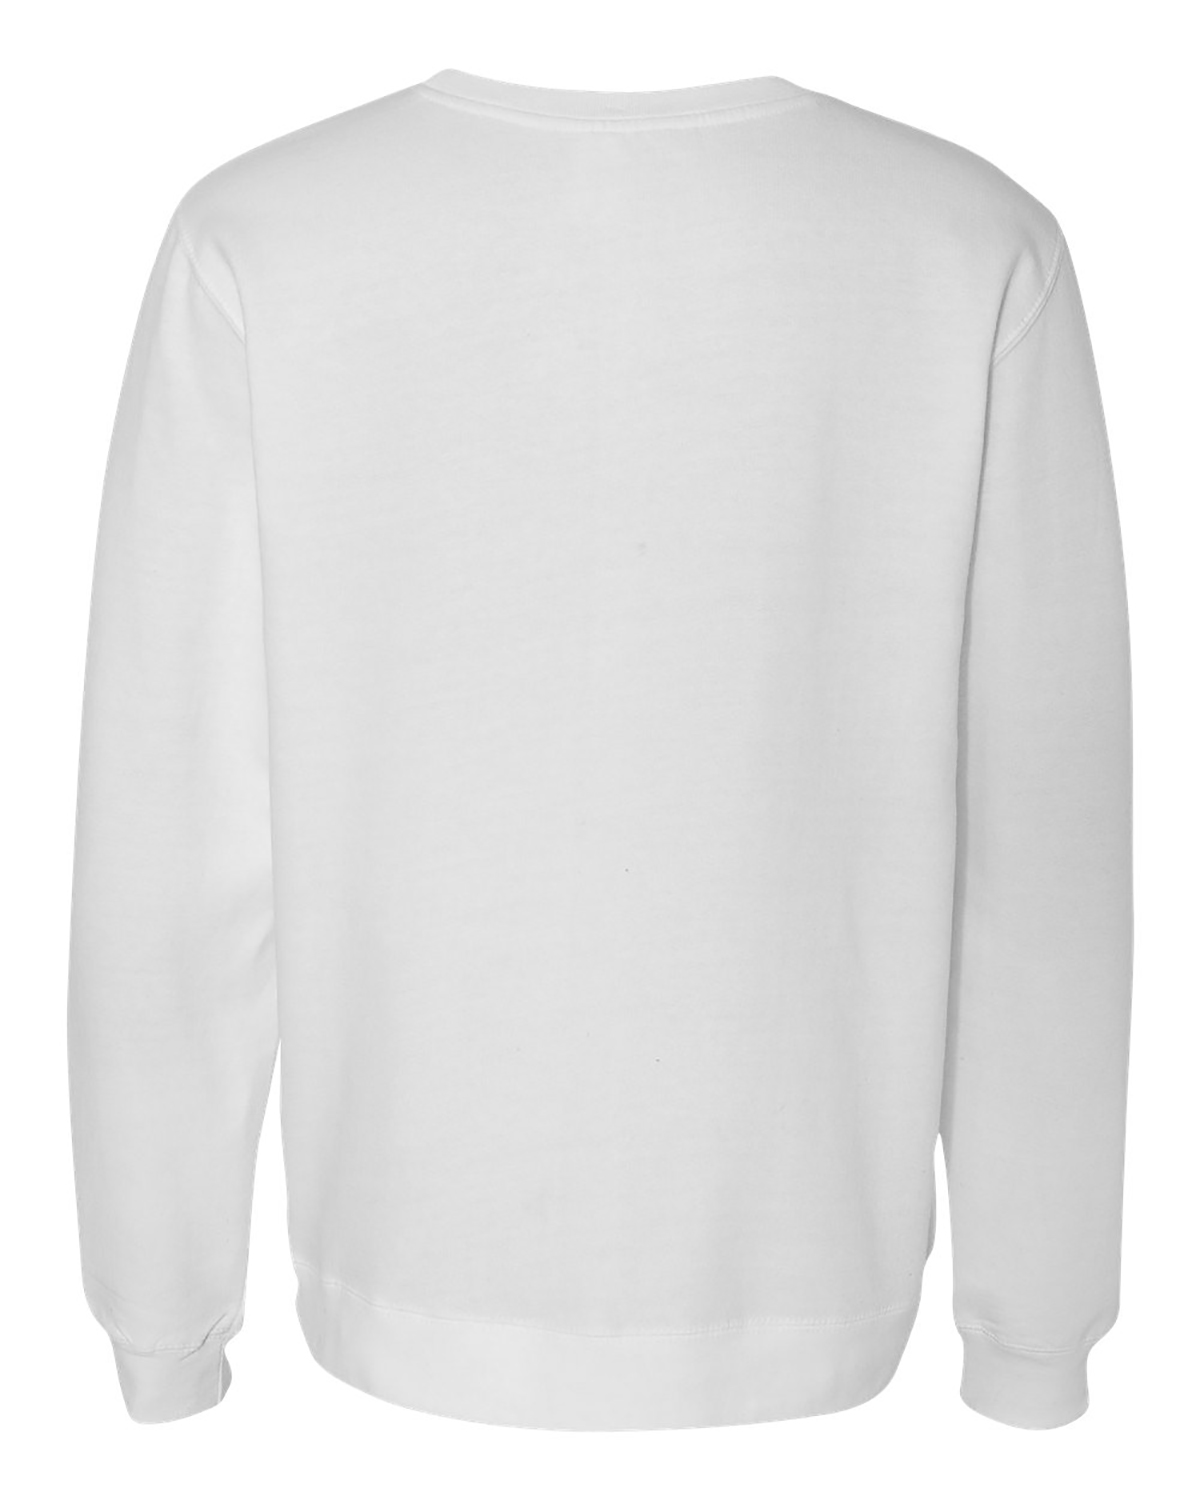 'Independent Trading Co. SS3000 Midweight Crewneck Sweatshirt'